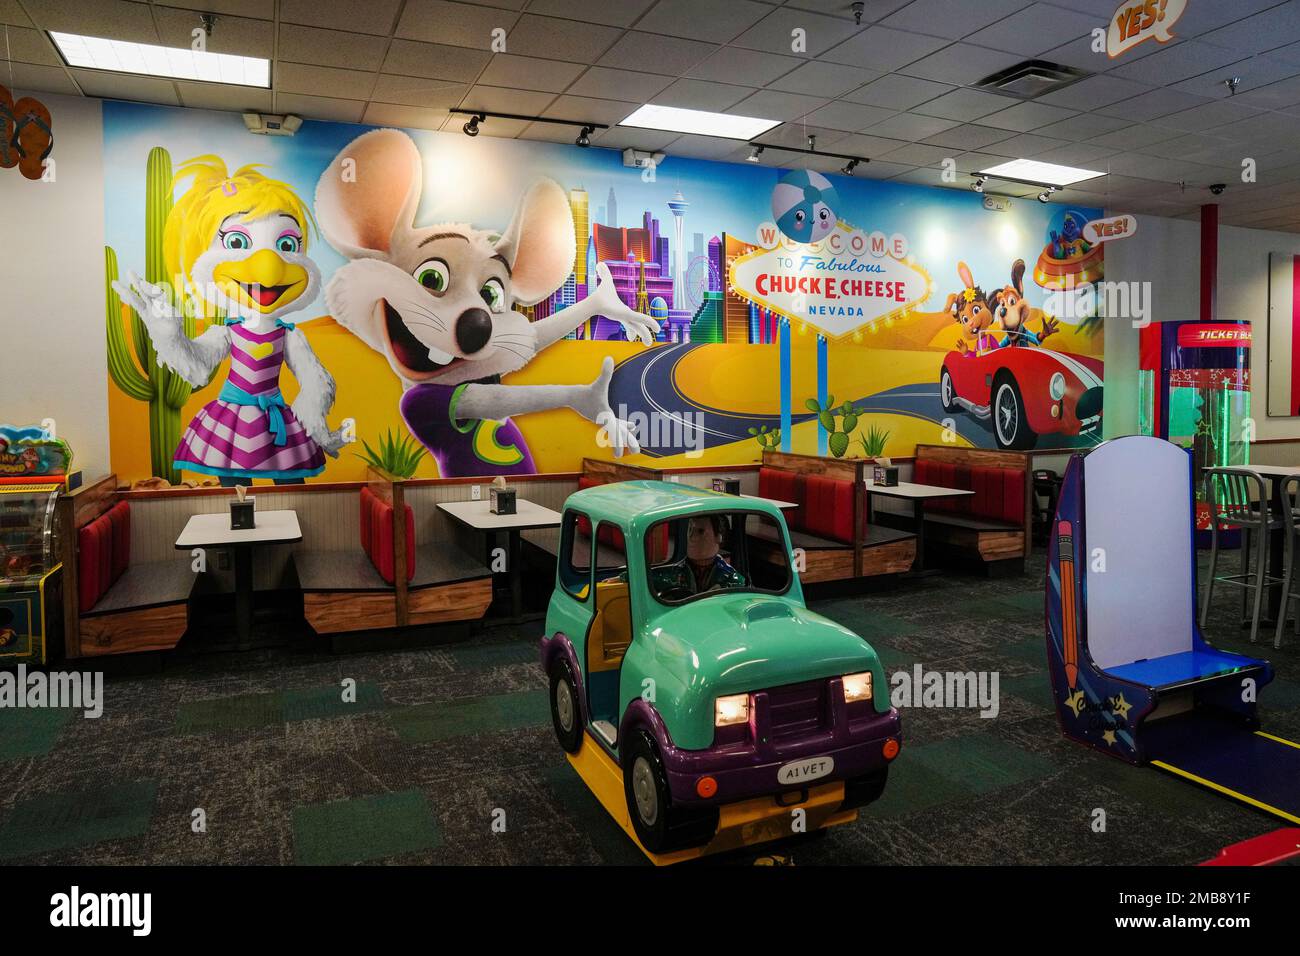 IMAGE DISTRIBUTED FOR CEC ENTERTAINMENT - Welcome to the Fabulous Chuck E.  Cheese Fun Center in Nevada! The reimagined Chuck E. Cheese features a  mural wall that pays homage to the city